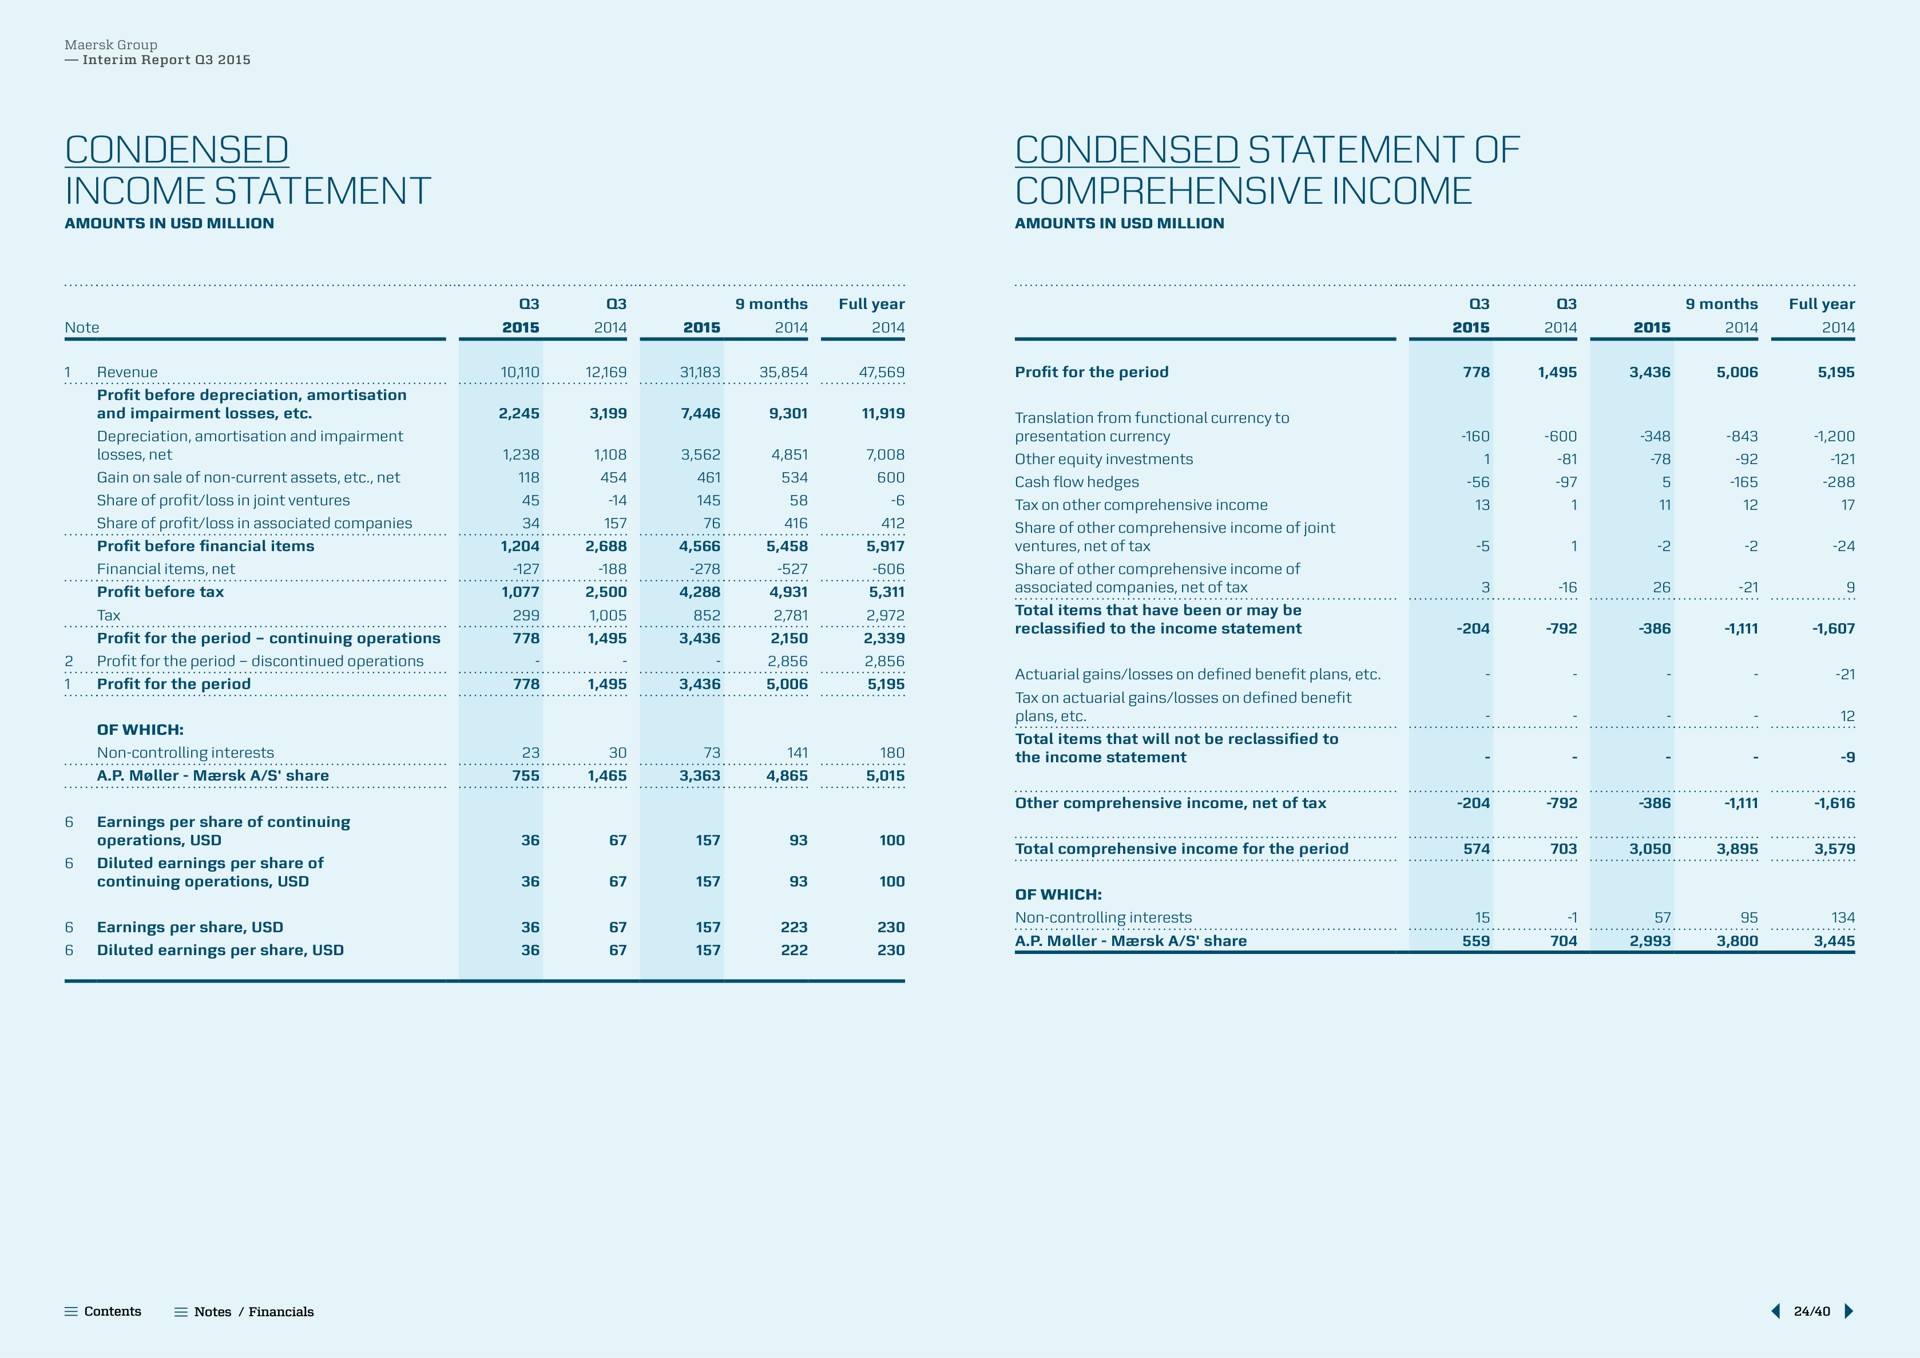 condensed income statement condensed statement of comprehensive income a share other an non controlling interests he by | Maersk